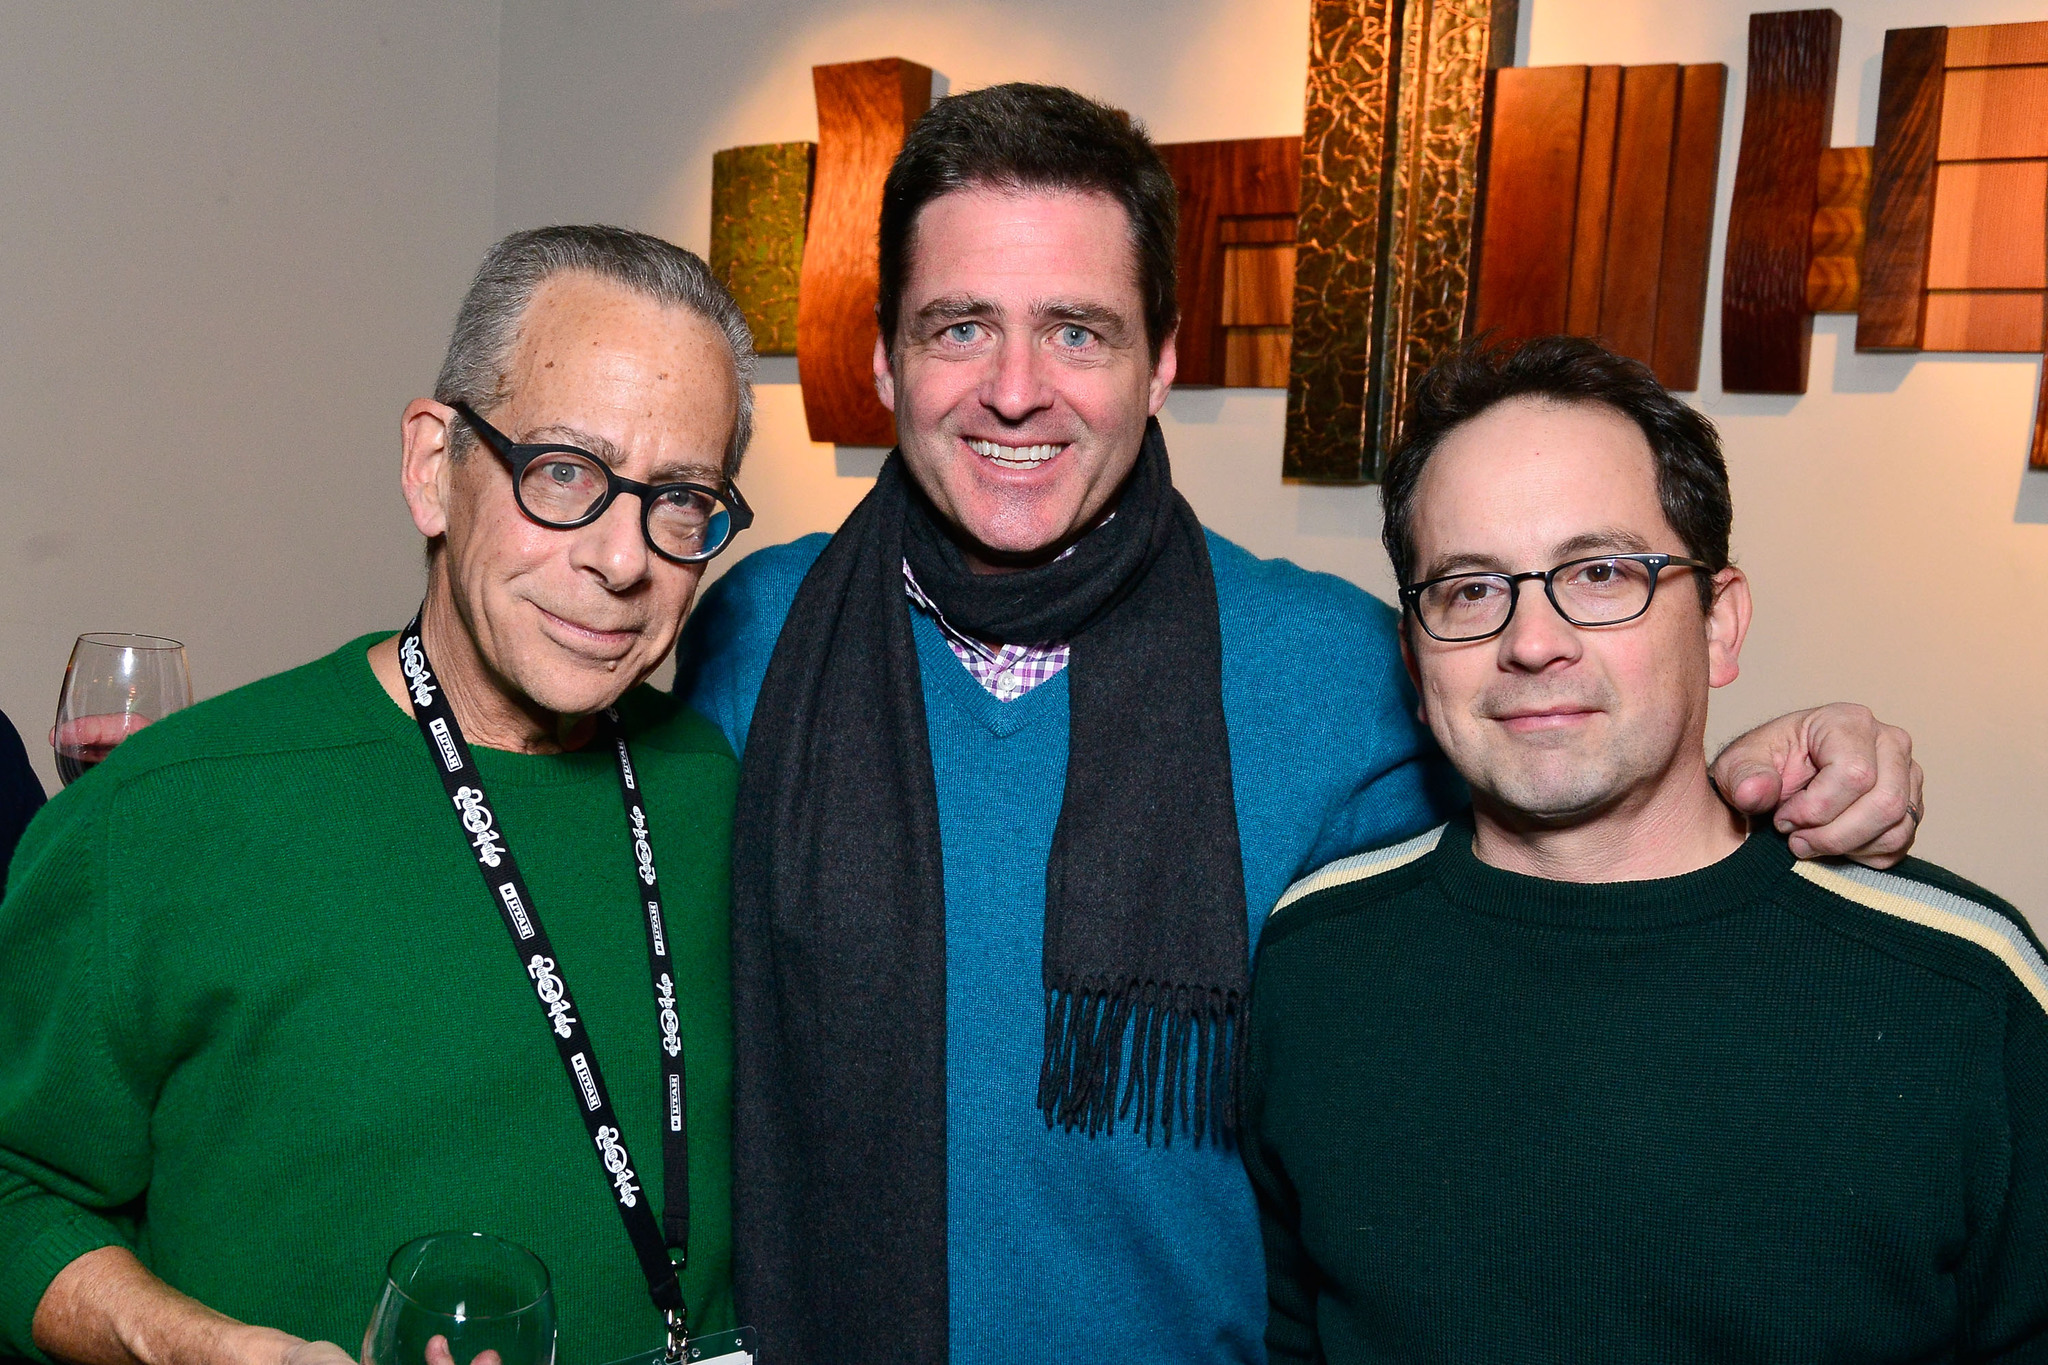 Artisic Director of LAFF David Ansen, Film Independant's Josh Welsh and Associate Director of programming Doug Jones attend the IMDb Sundance dinner party at the Mustang on January 20, 2014 in Park City, Utah.